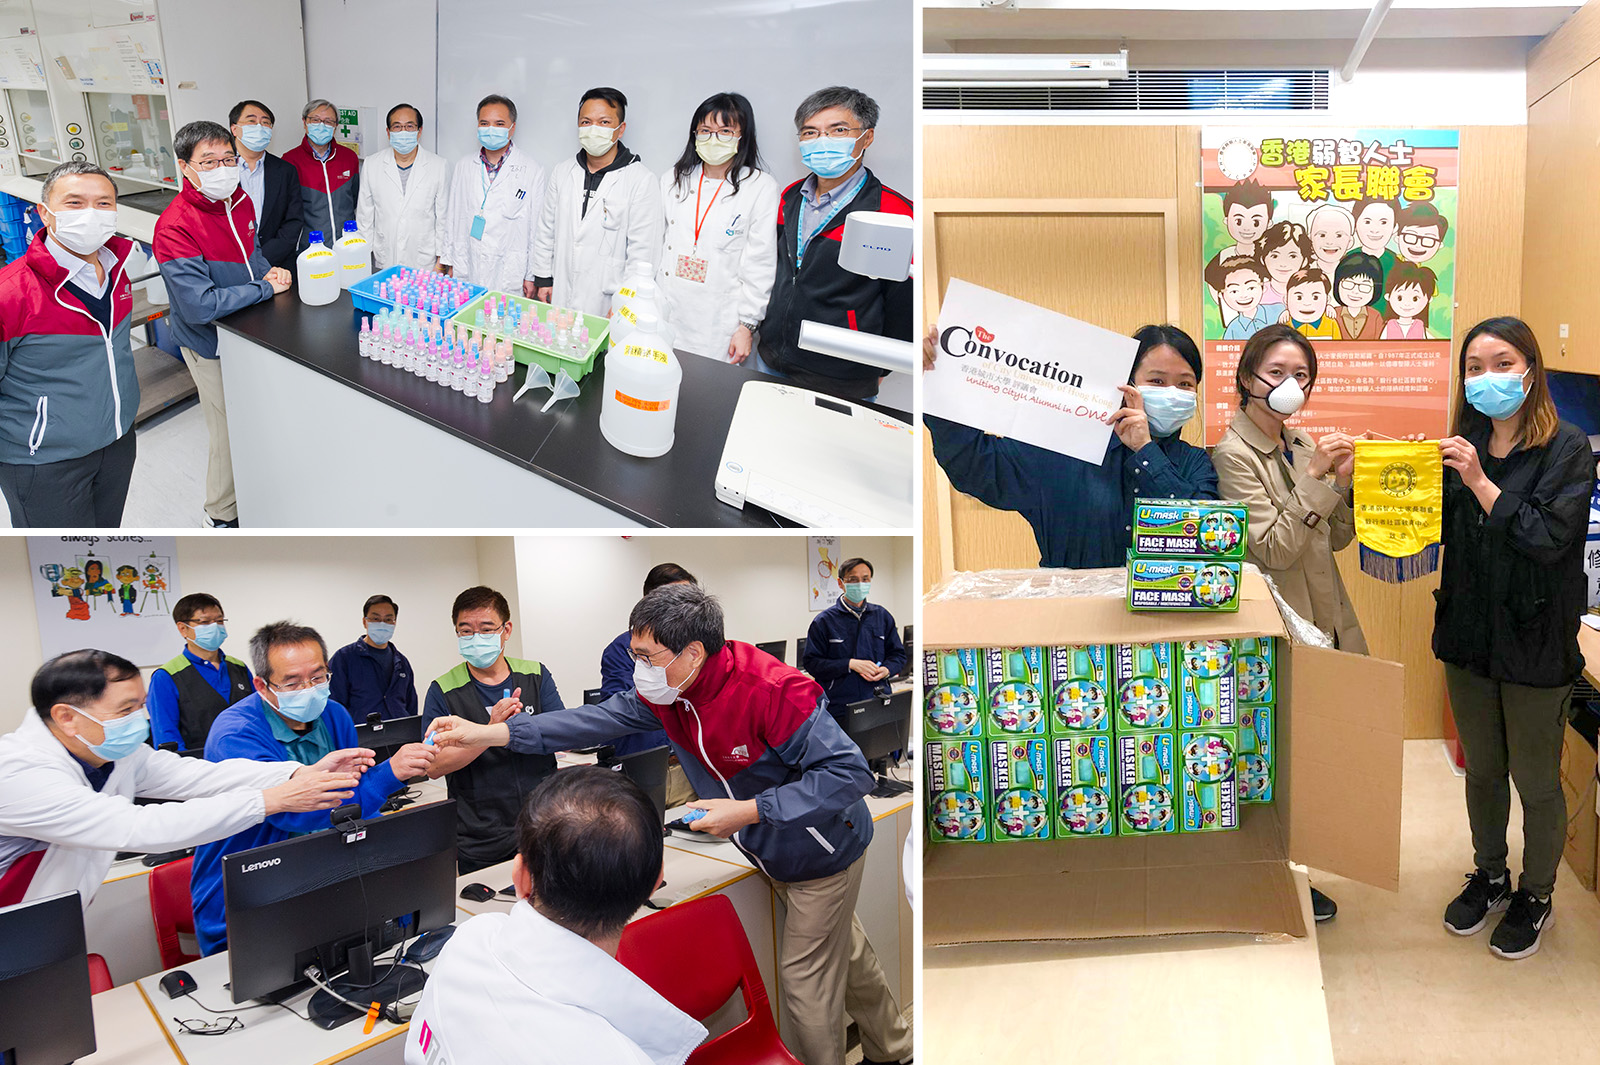 CityU community distributes anti-epidemic products to the community to help fight the spread of the epidemic.